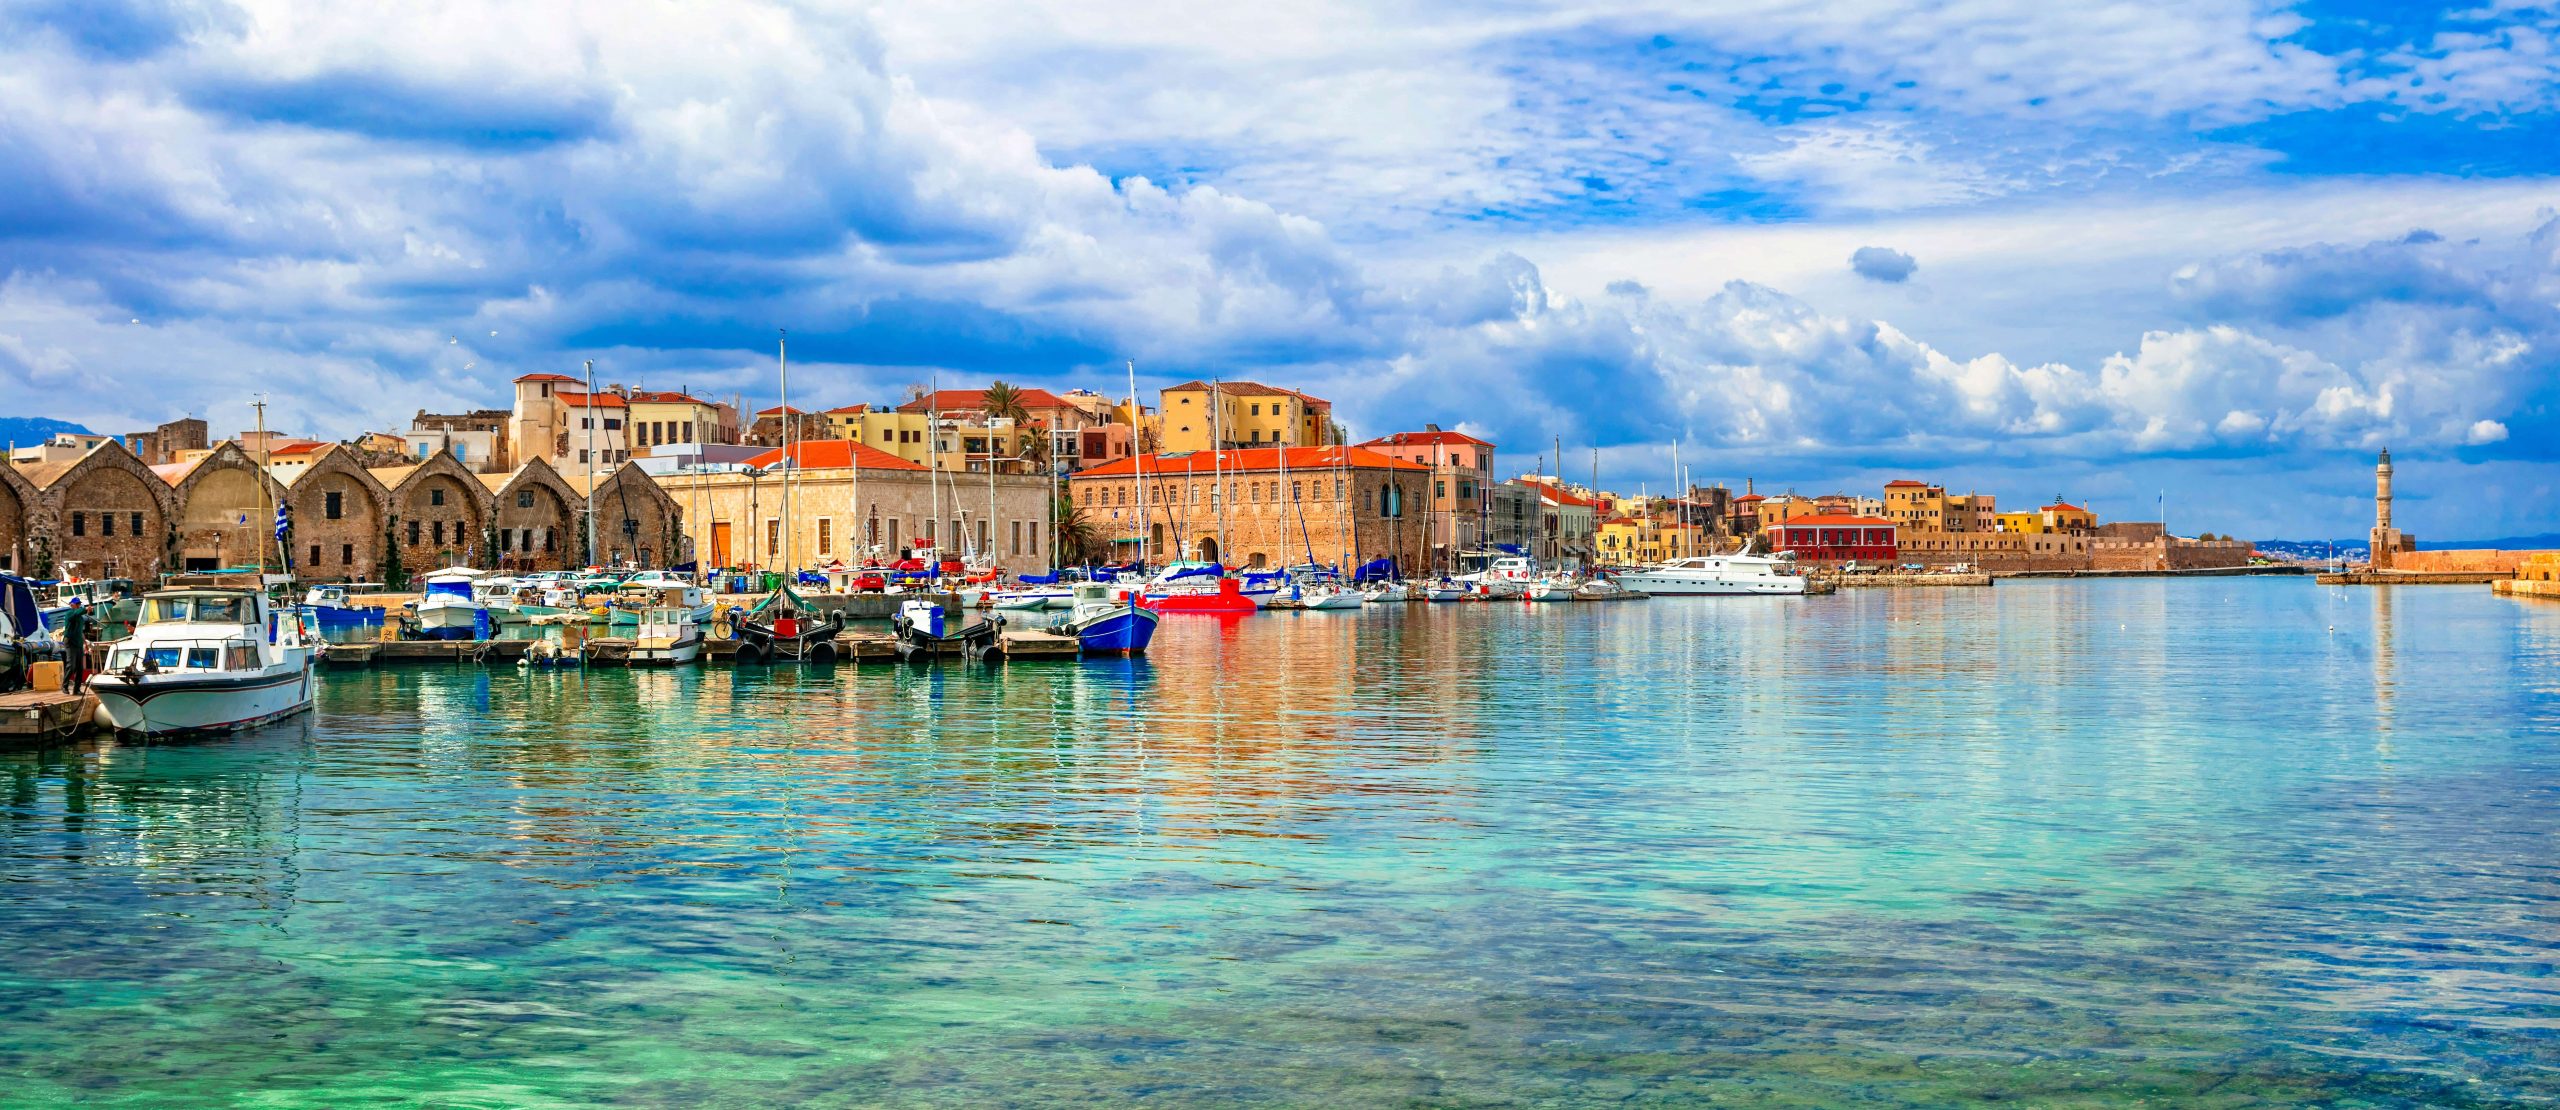 crete old town chania helicopter charter transfer